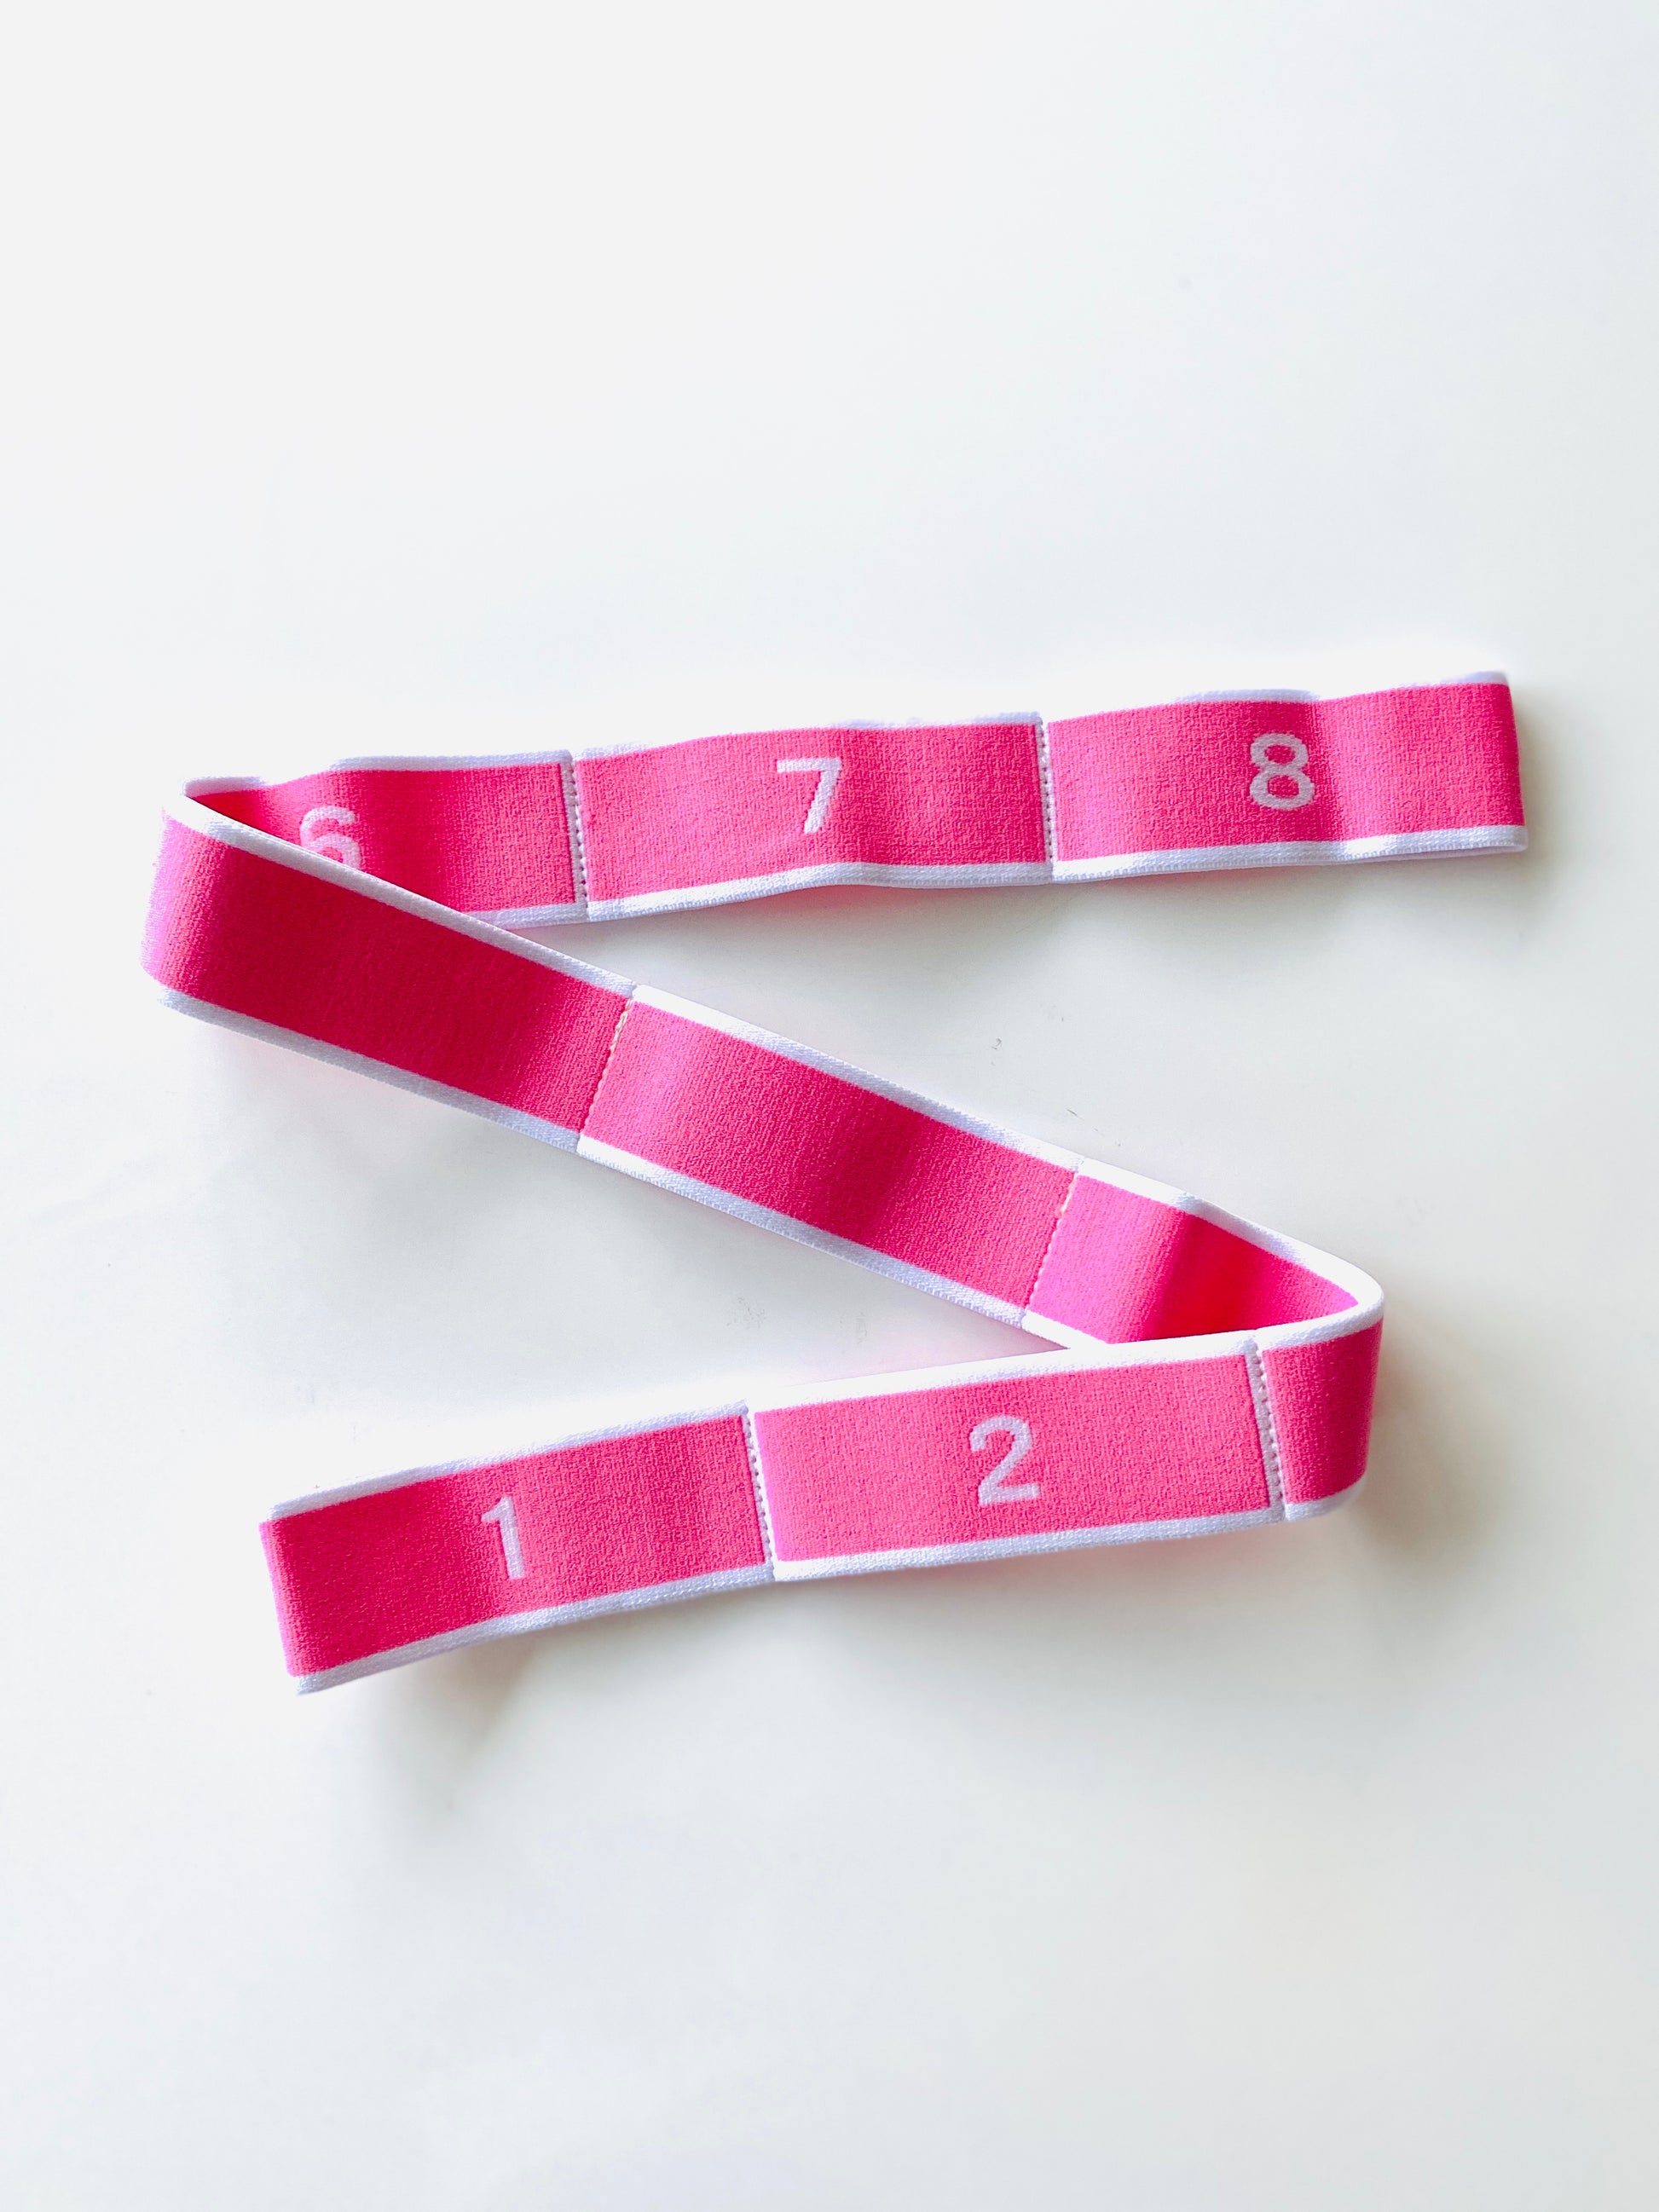 Pink stretchy flexibility band for strengthening and conditioning training from The Collective Dancewear